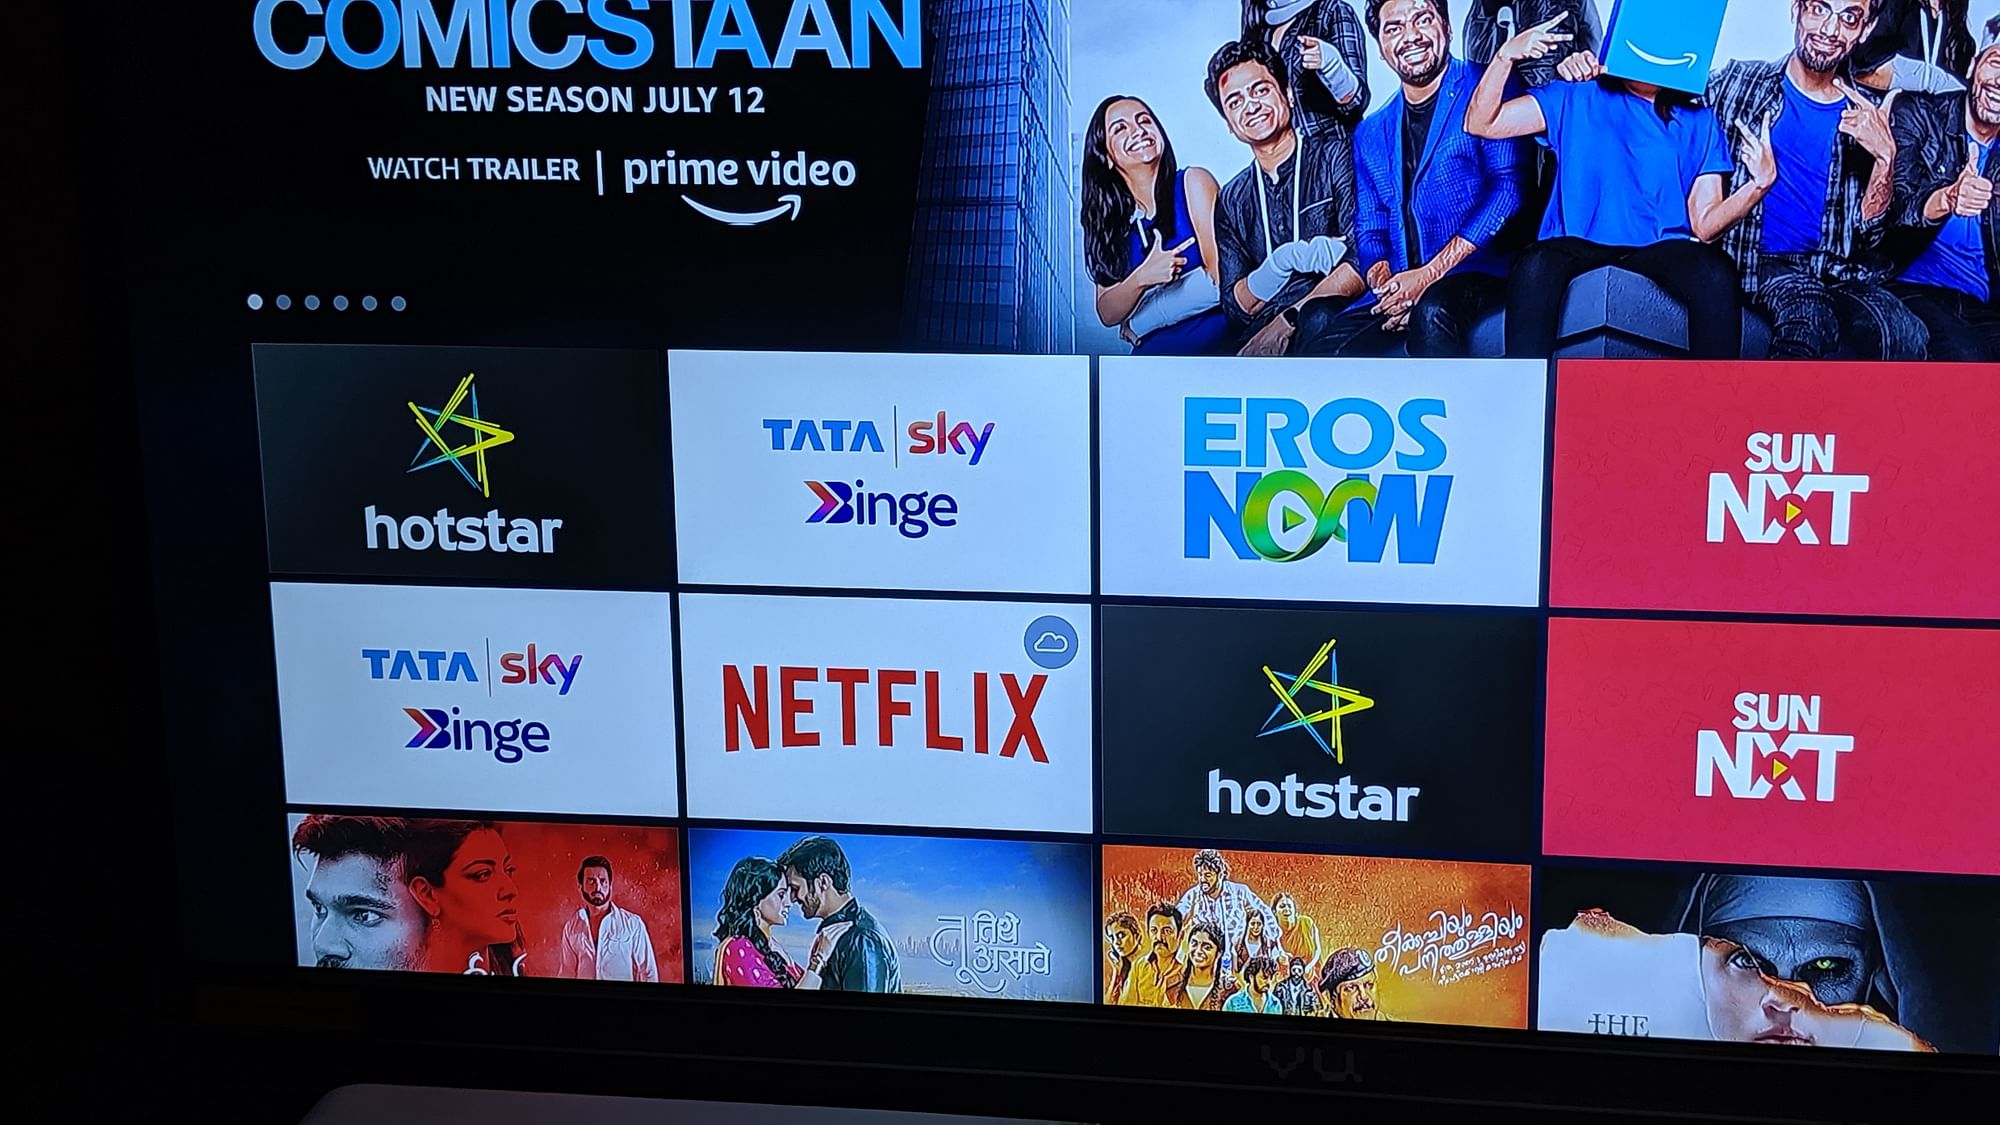 Tata Sky launched Binge service with Amazon Fire TV Stick sometime back.